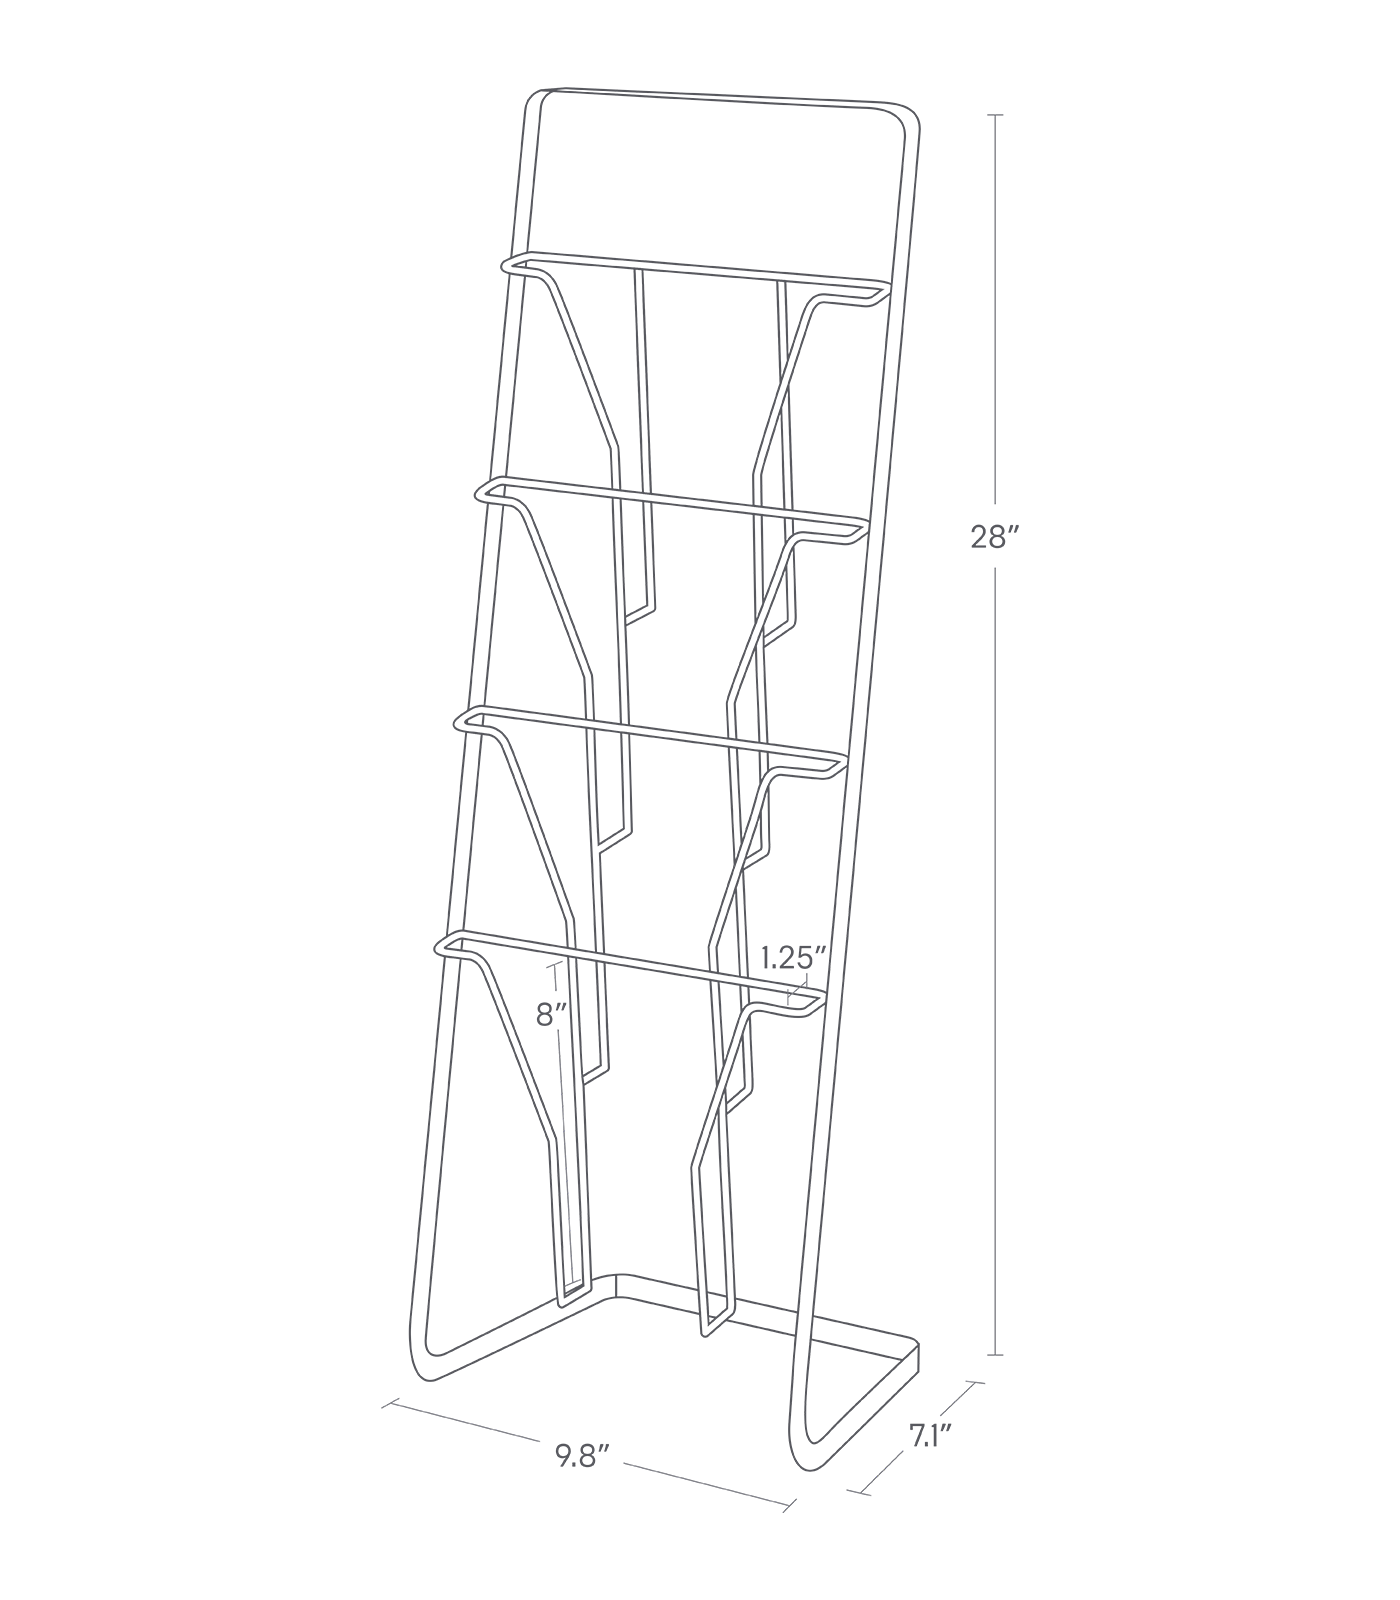 Dimension image for Magazine Rack on a white background including dimensions  L 7.09 x W 9.84 x H 27.95 inches